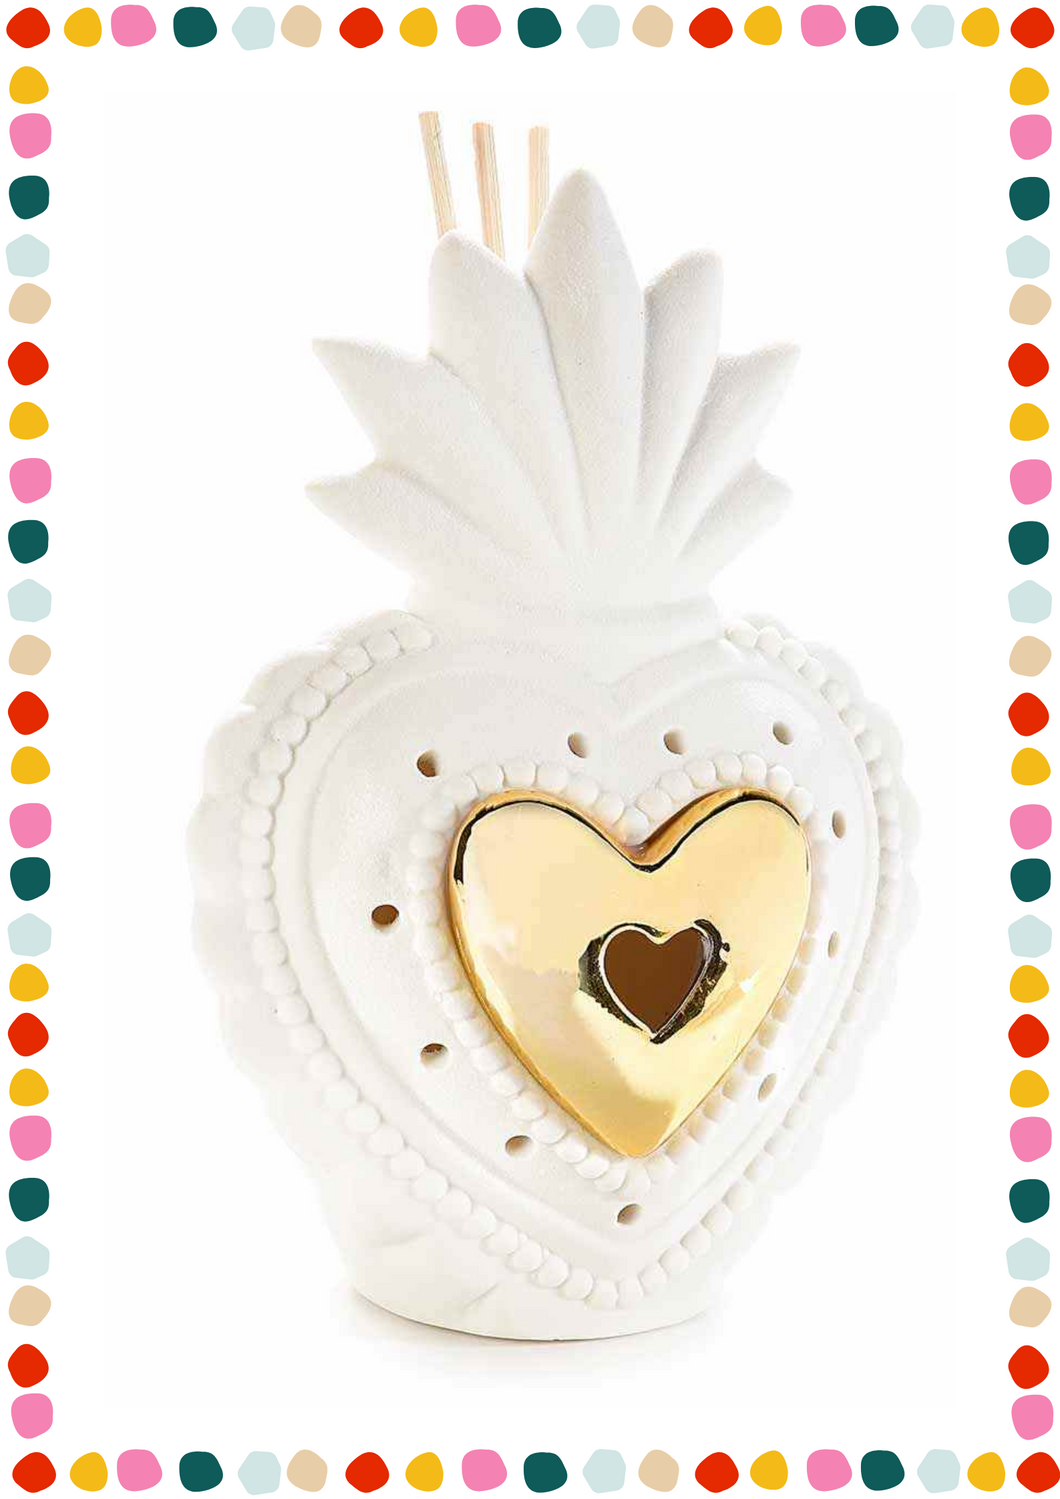 Air freshener with sticks and LED light - heart